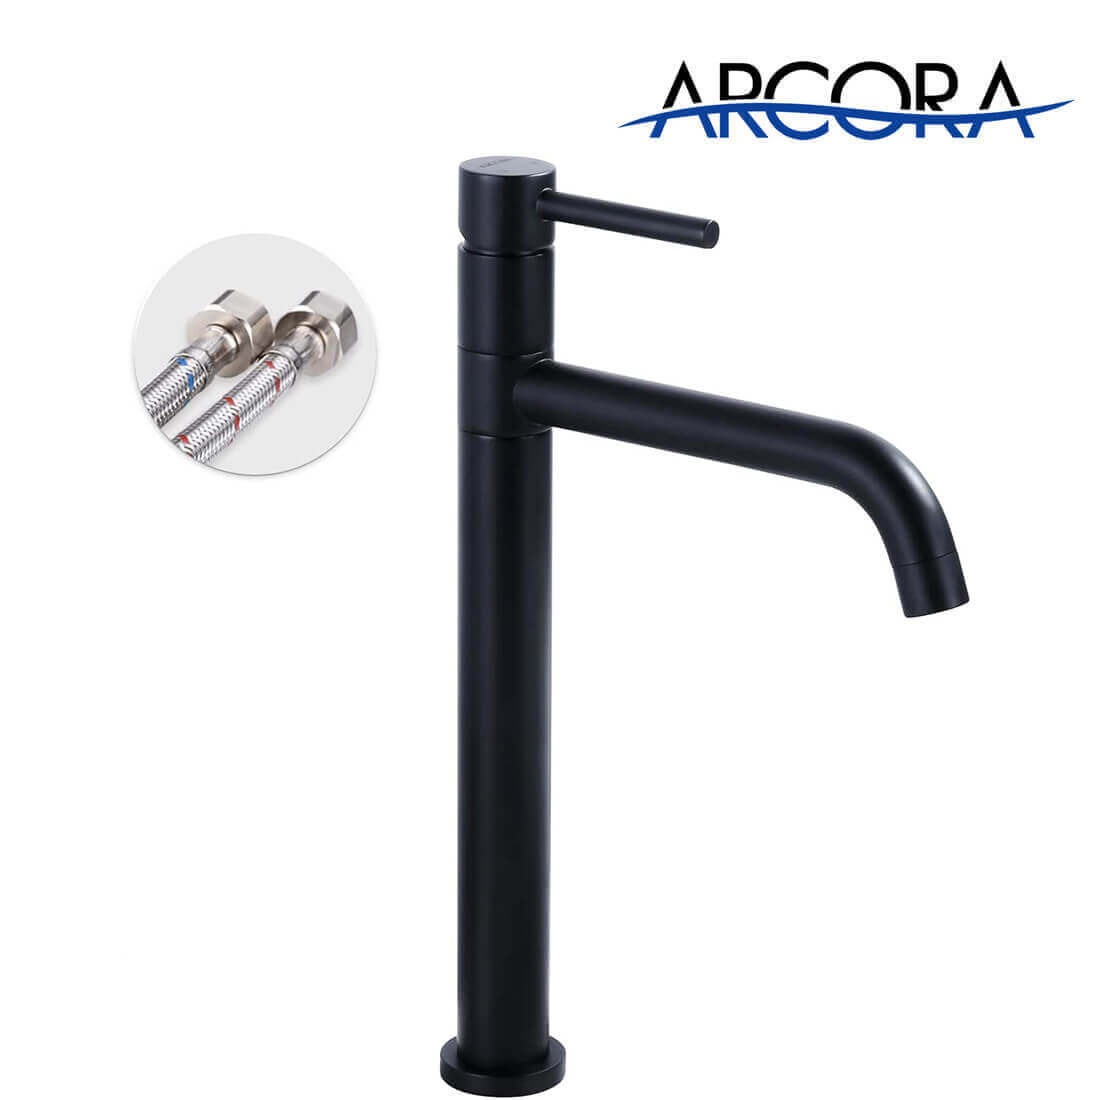 ARCORA 360 Degree Rotation Hot And Cold Tall Black Bathroom Mixer Tap